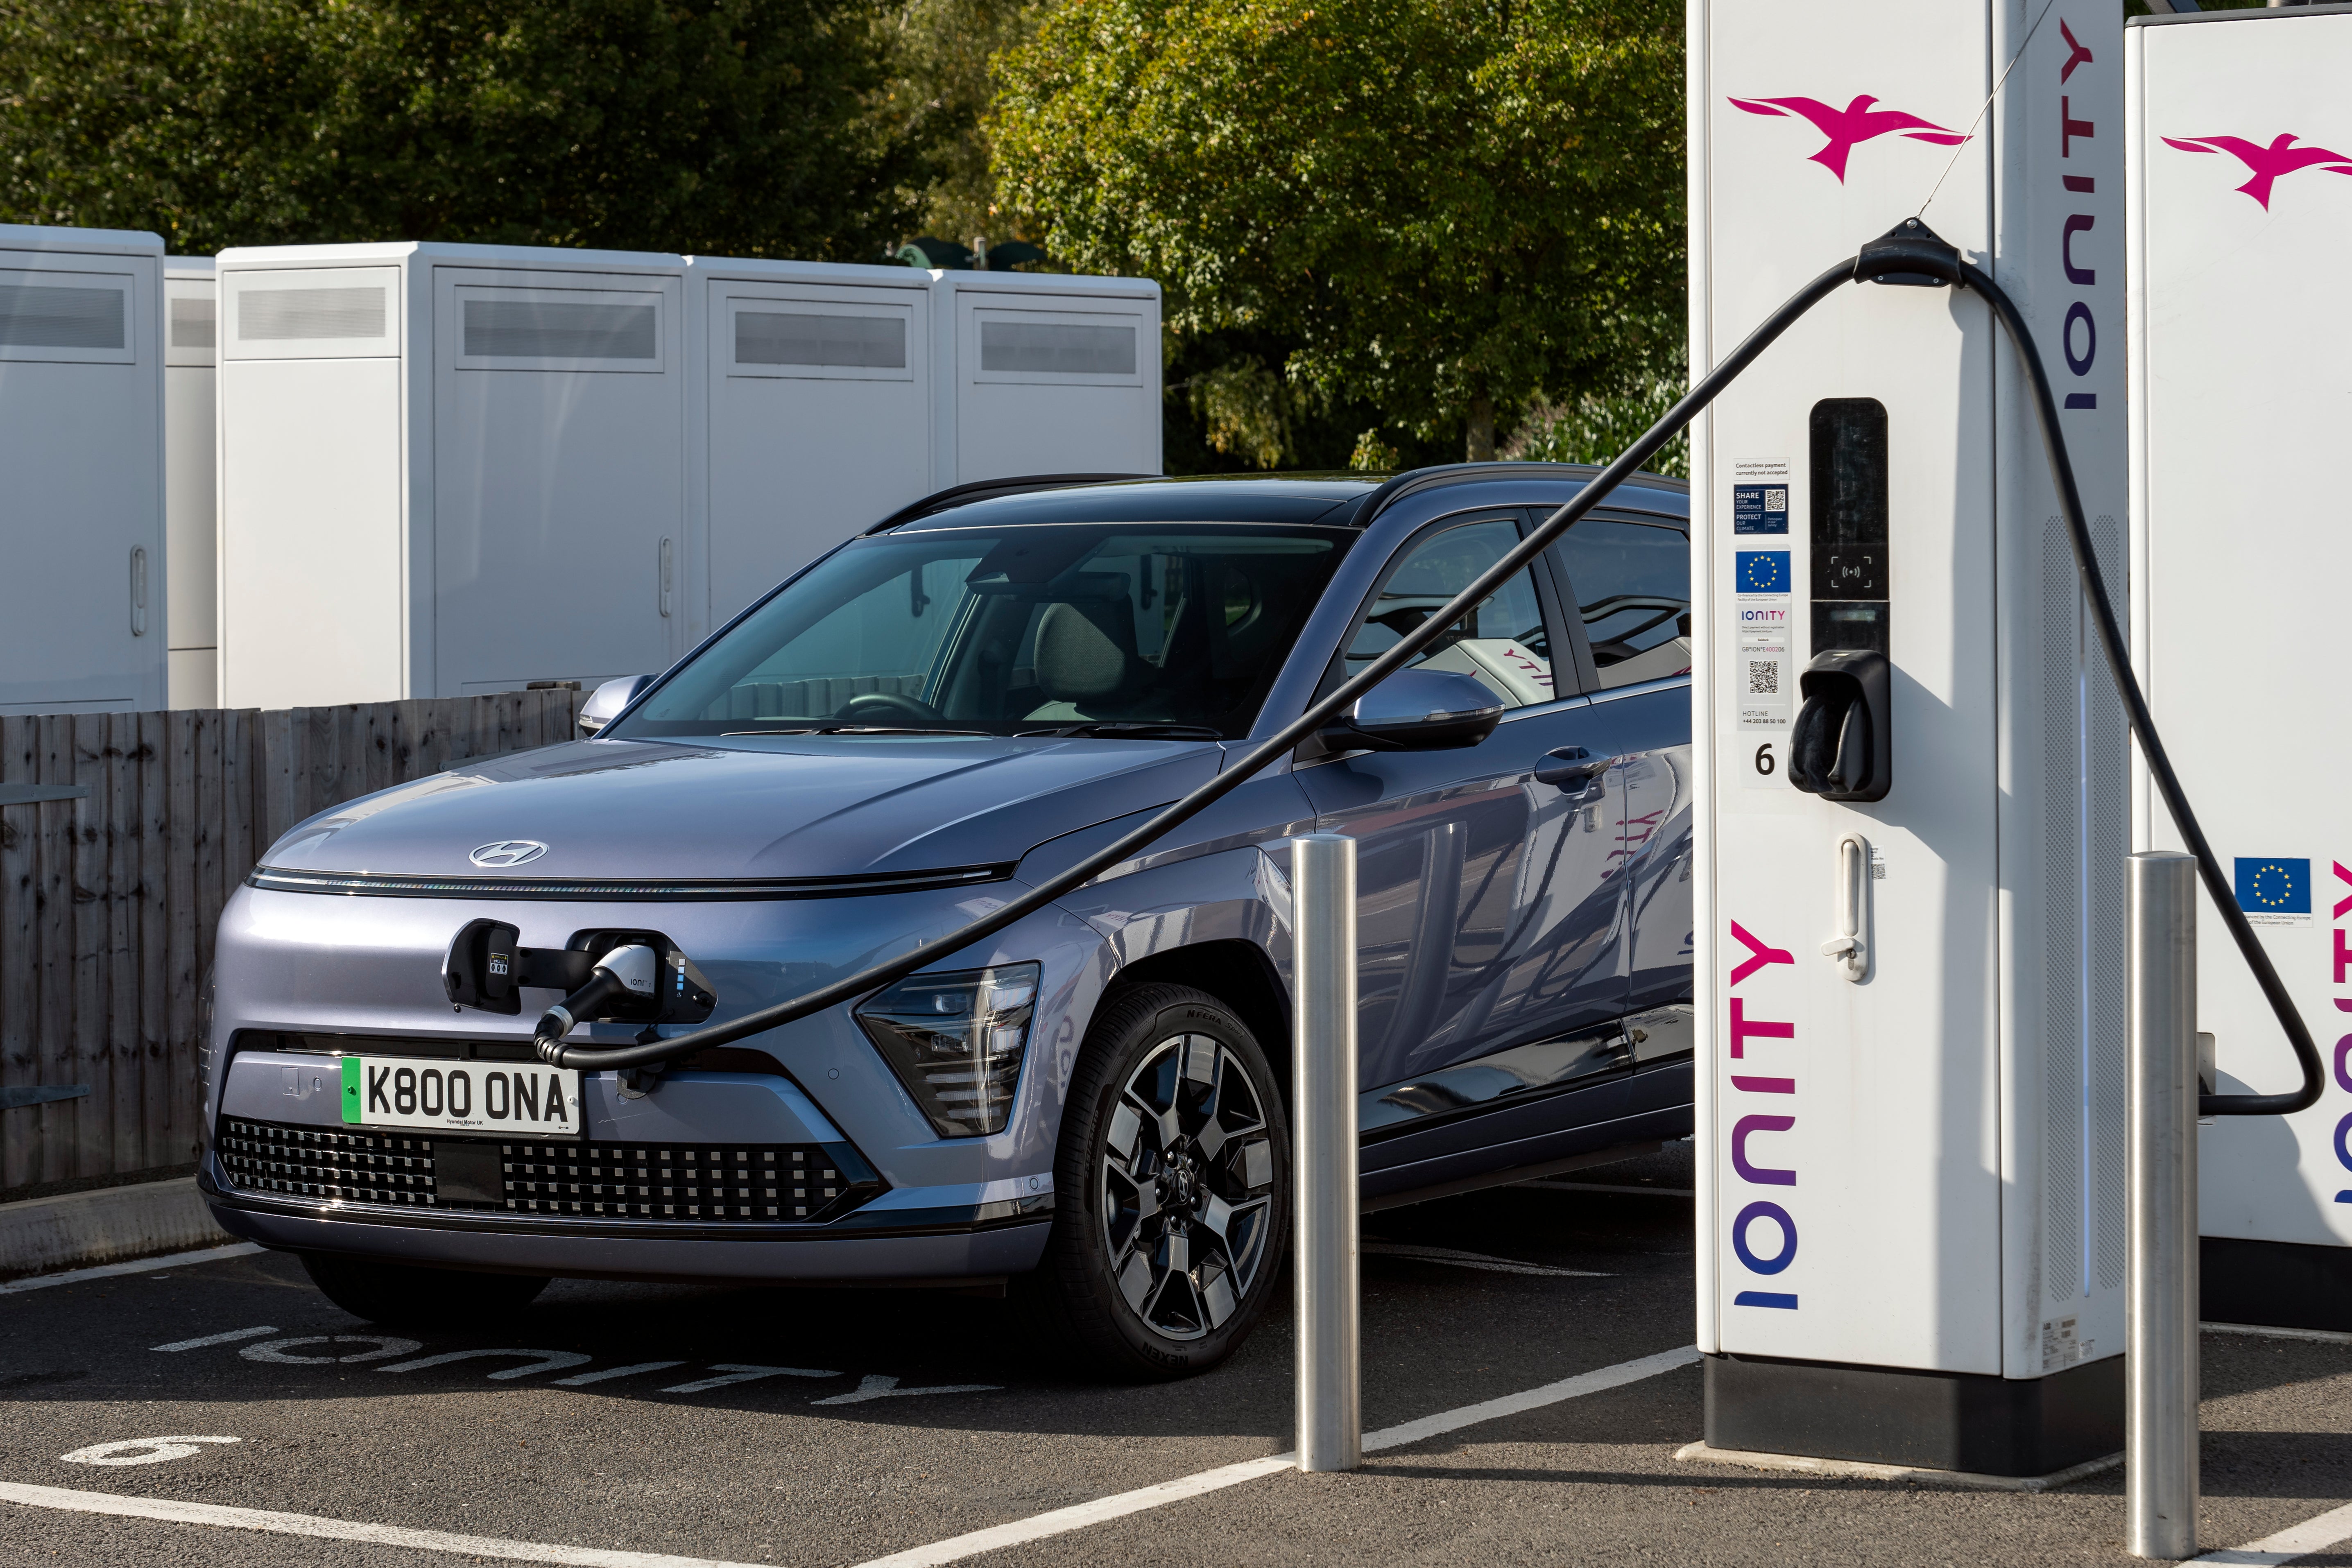 It will take nearly 10 hours to ‘fill up’ at home – but much less at a commercial fast charger